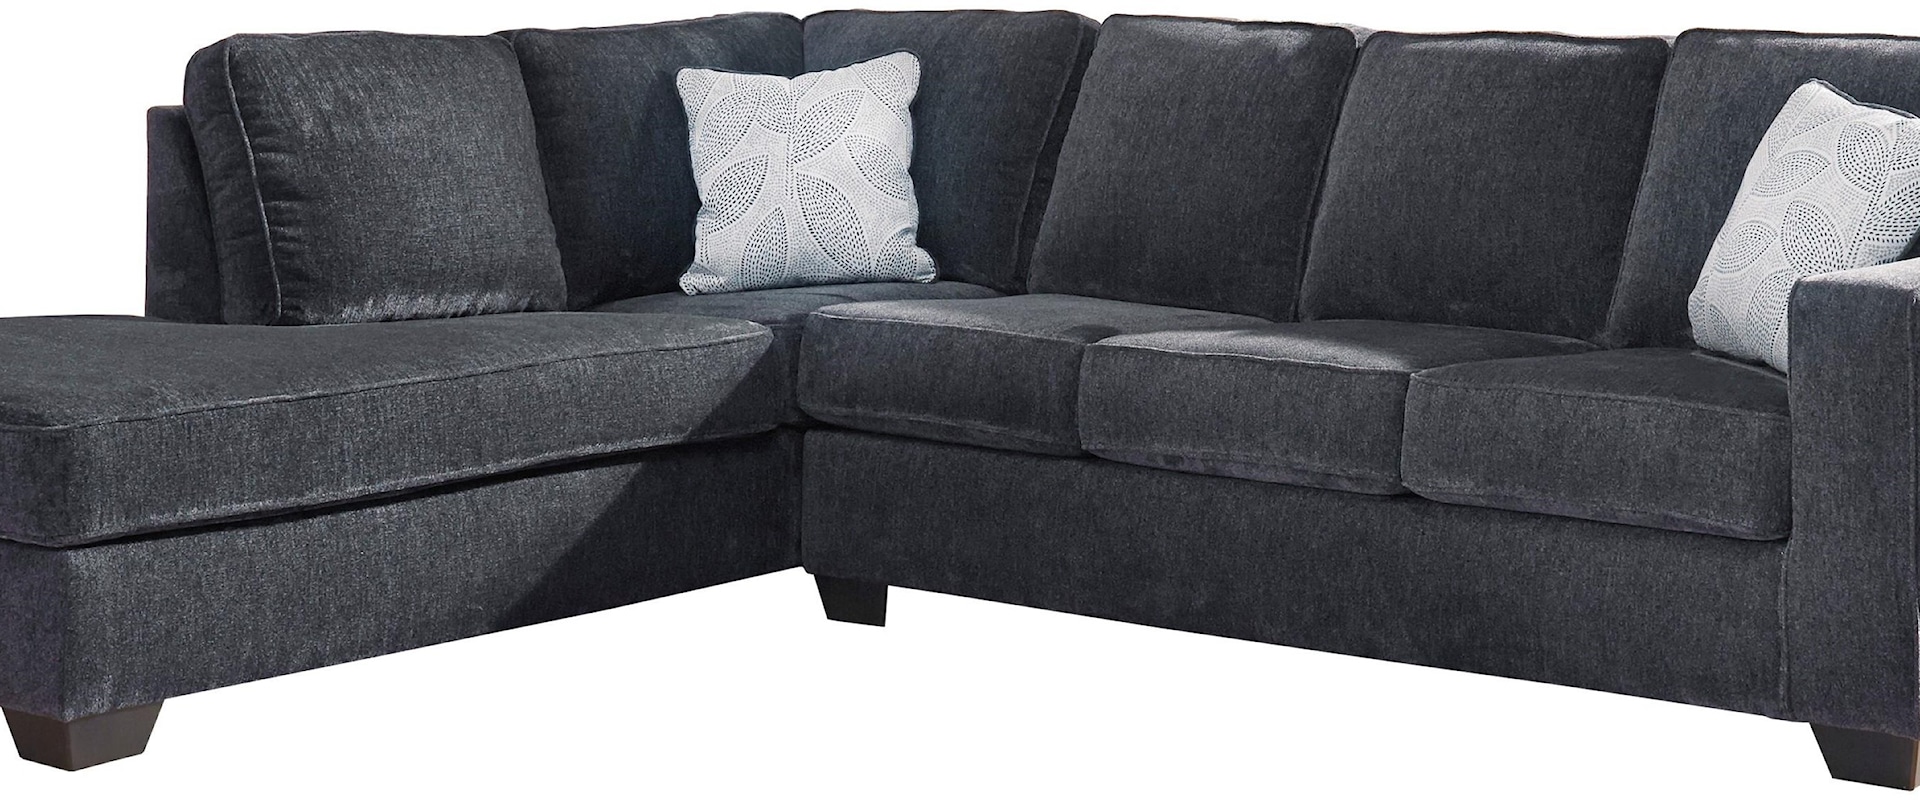 2 Piece Right Arm Facing Sleeper Sofa, Left Arm Facing Chaise Sectional, Chair and Ottoman Set